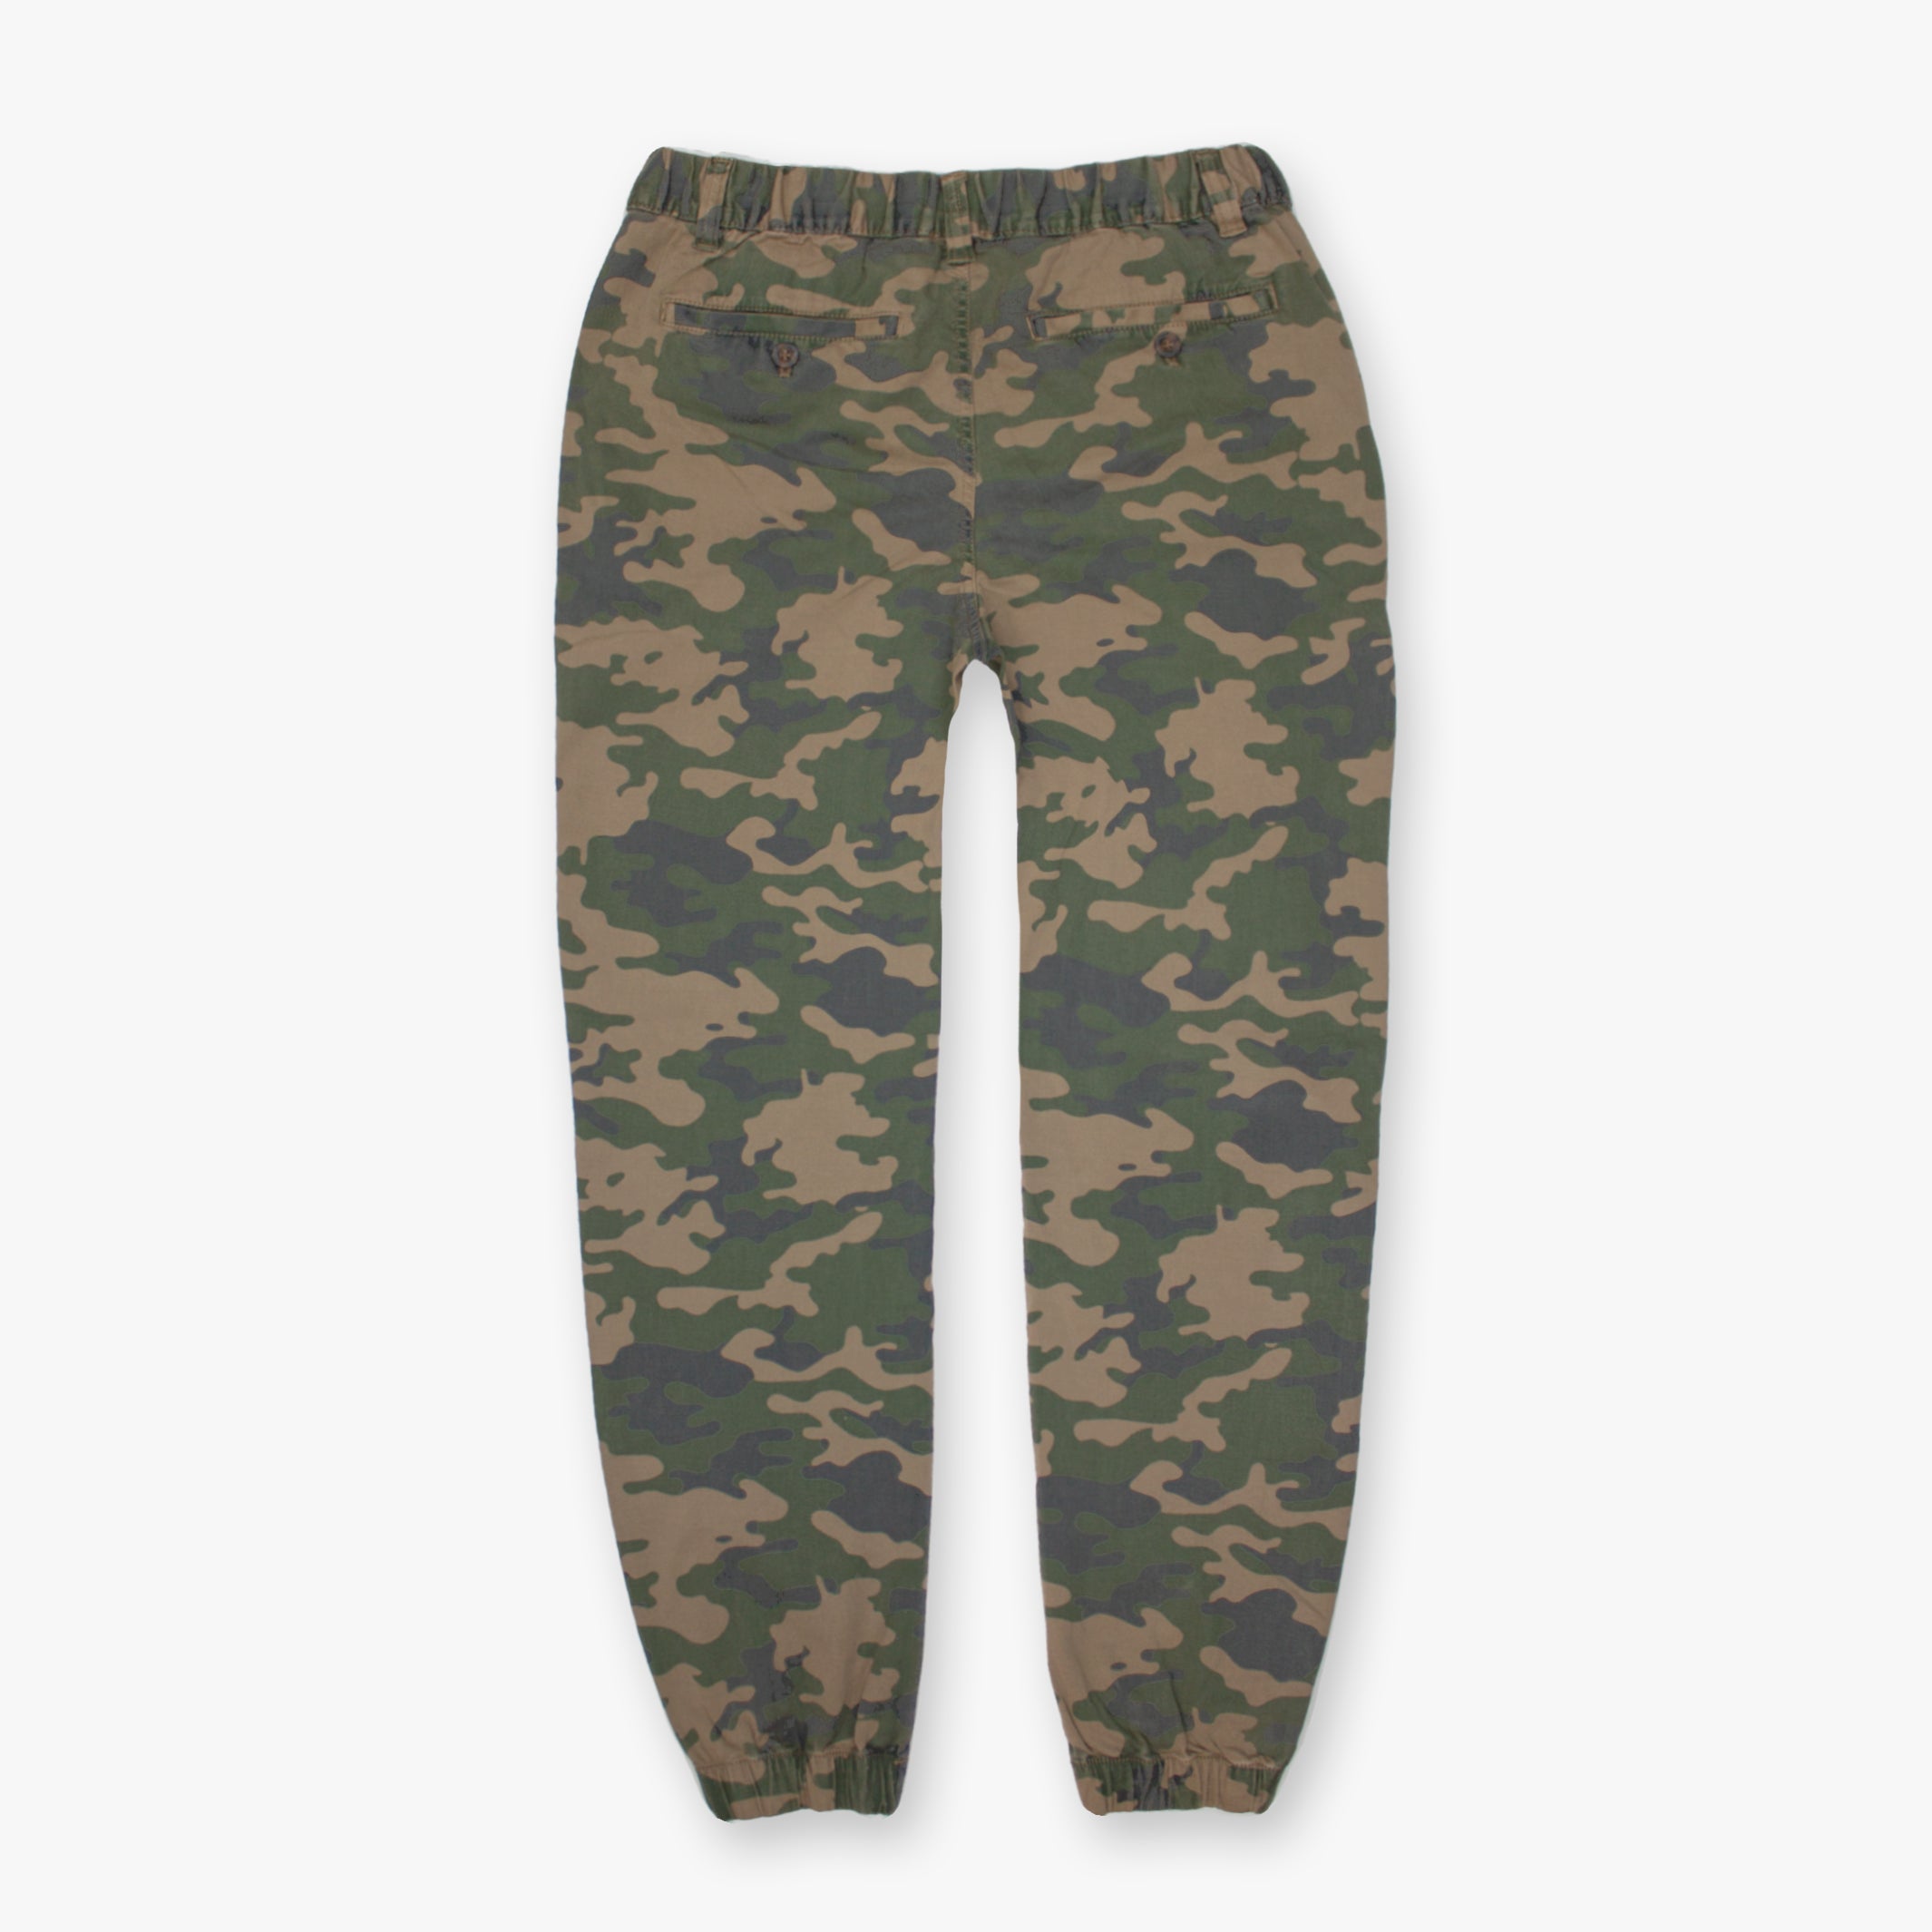 Stretch Jogger Woodland Camo back with belt loops, elastic waistband, zipper fly, ribbed ankle cuff and two buttoned back pockets